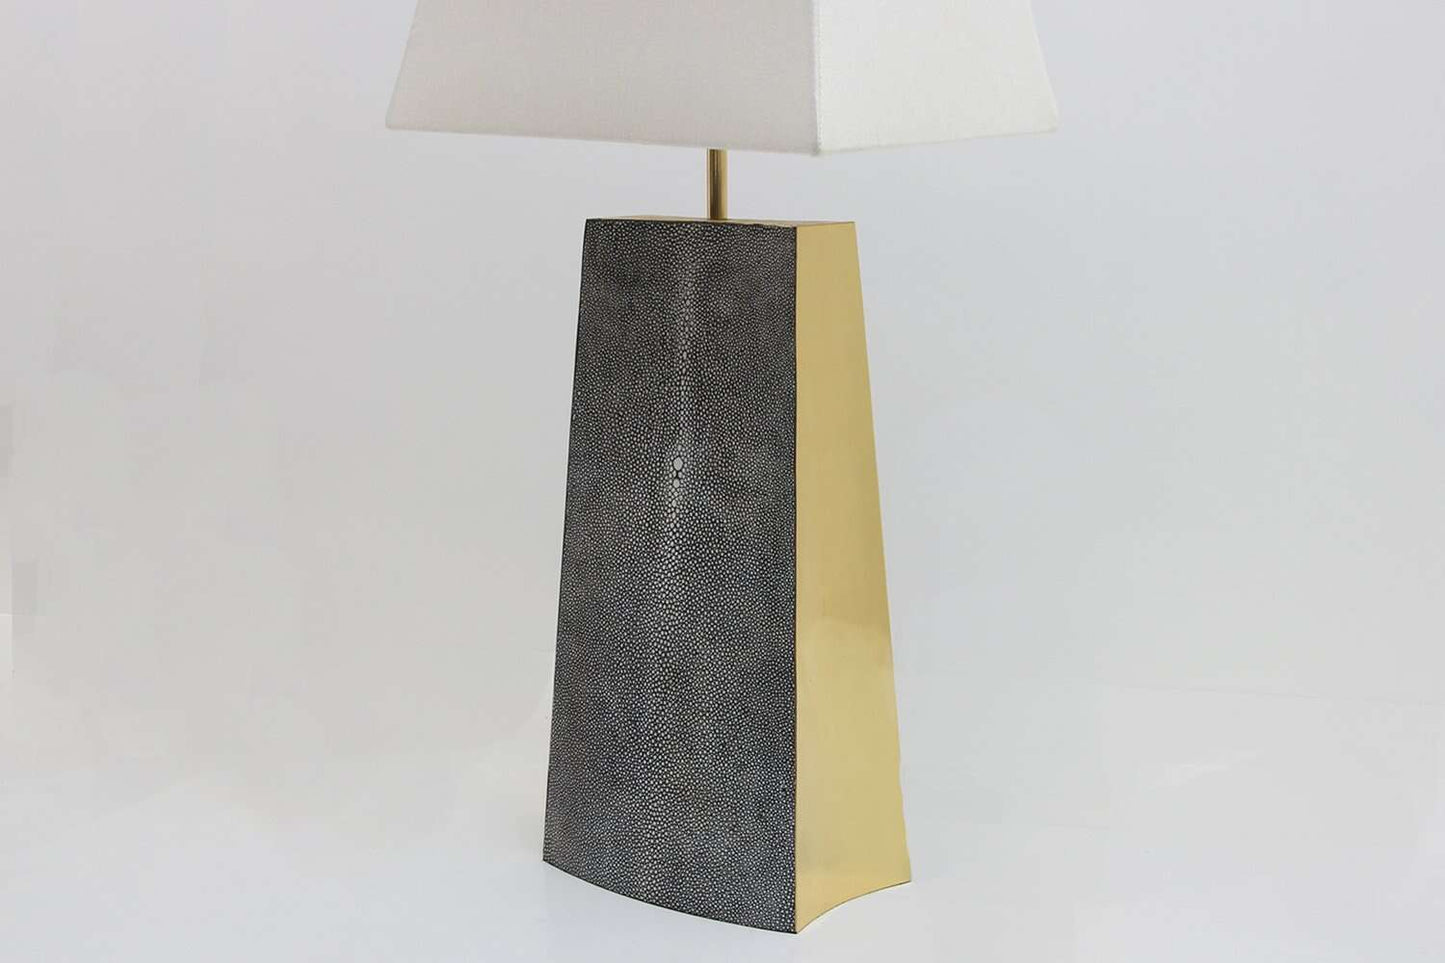 Madison Table Lamp in Charcoal Shagreen